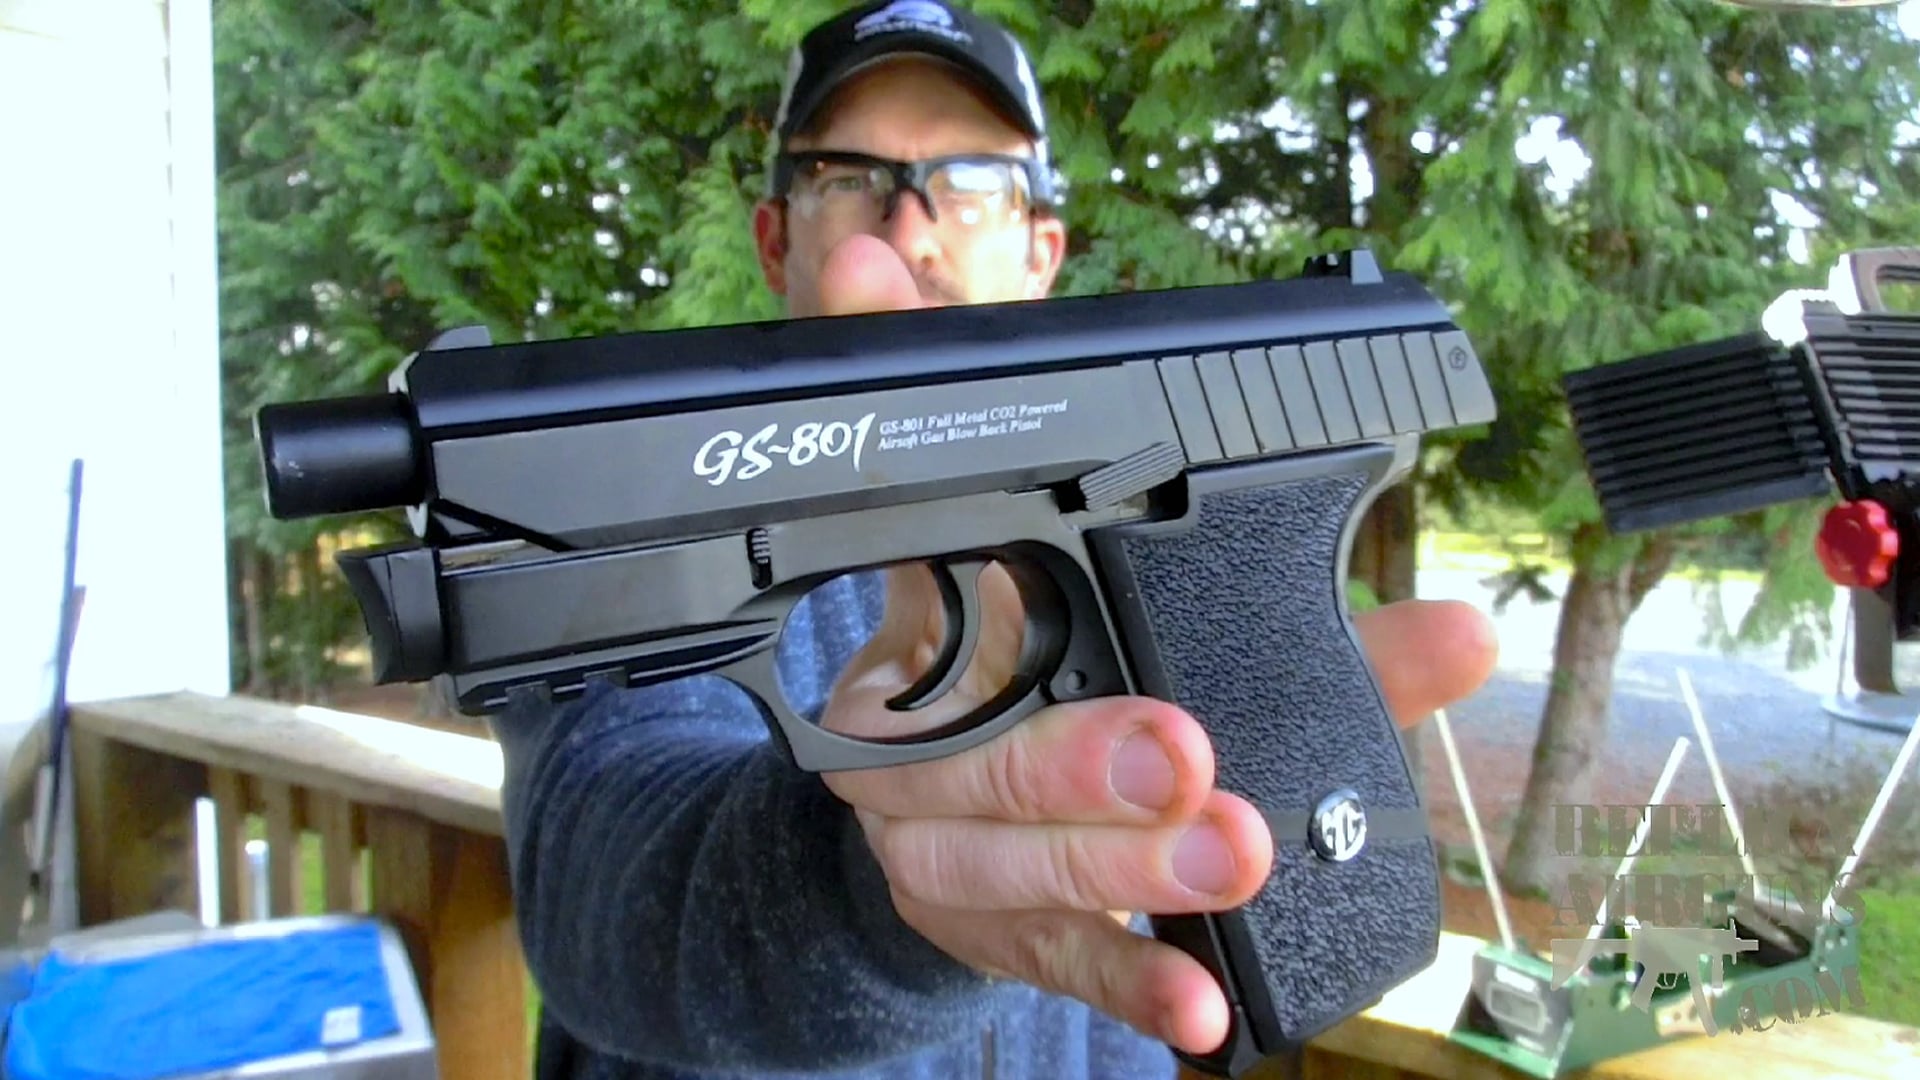 G&G GS-801 CO2 Blowback Airsoft Pistol Field Test Shooting Review